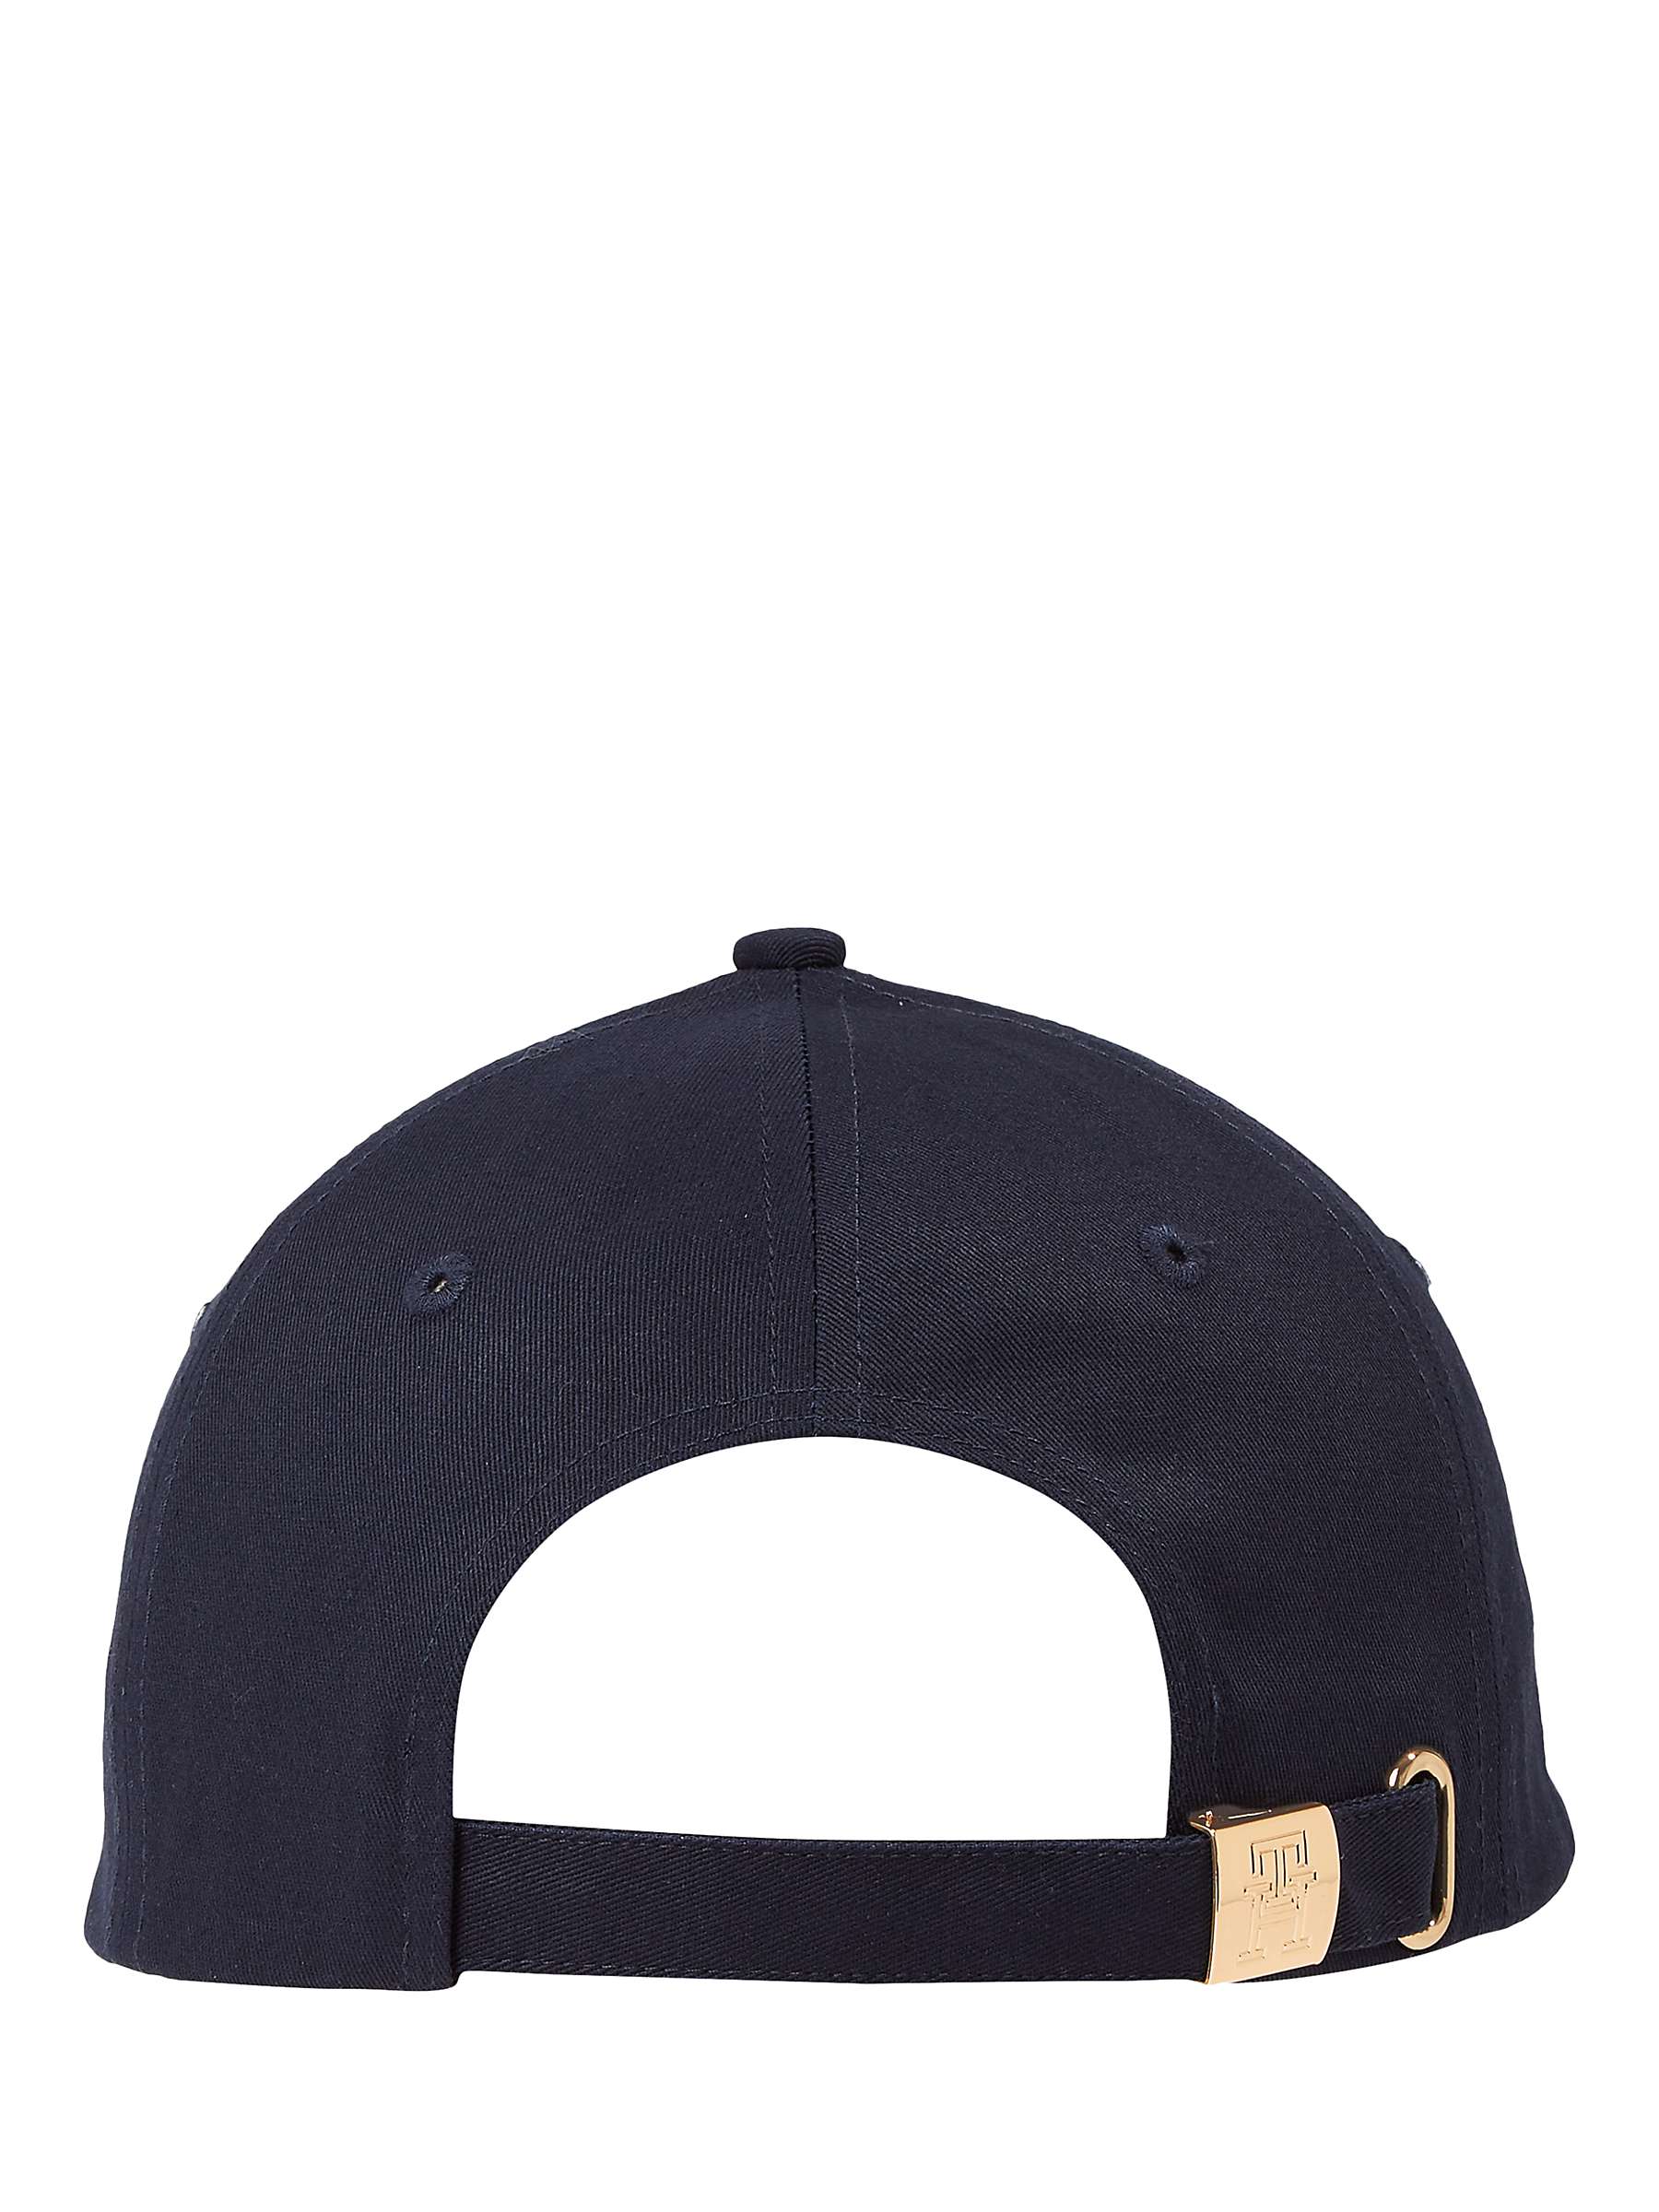 Buy Tommy Hilfiger Essential Chic Cap, Space Blue Online at johnlewis.com